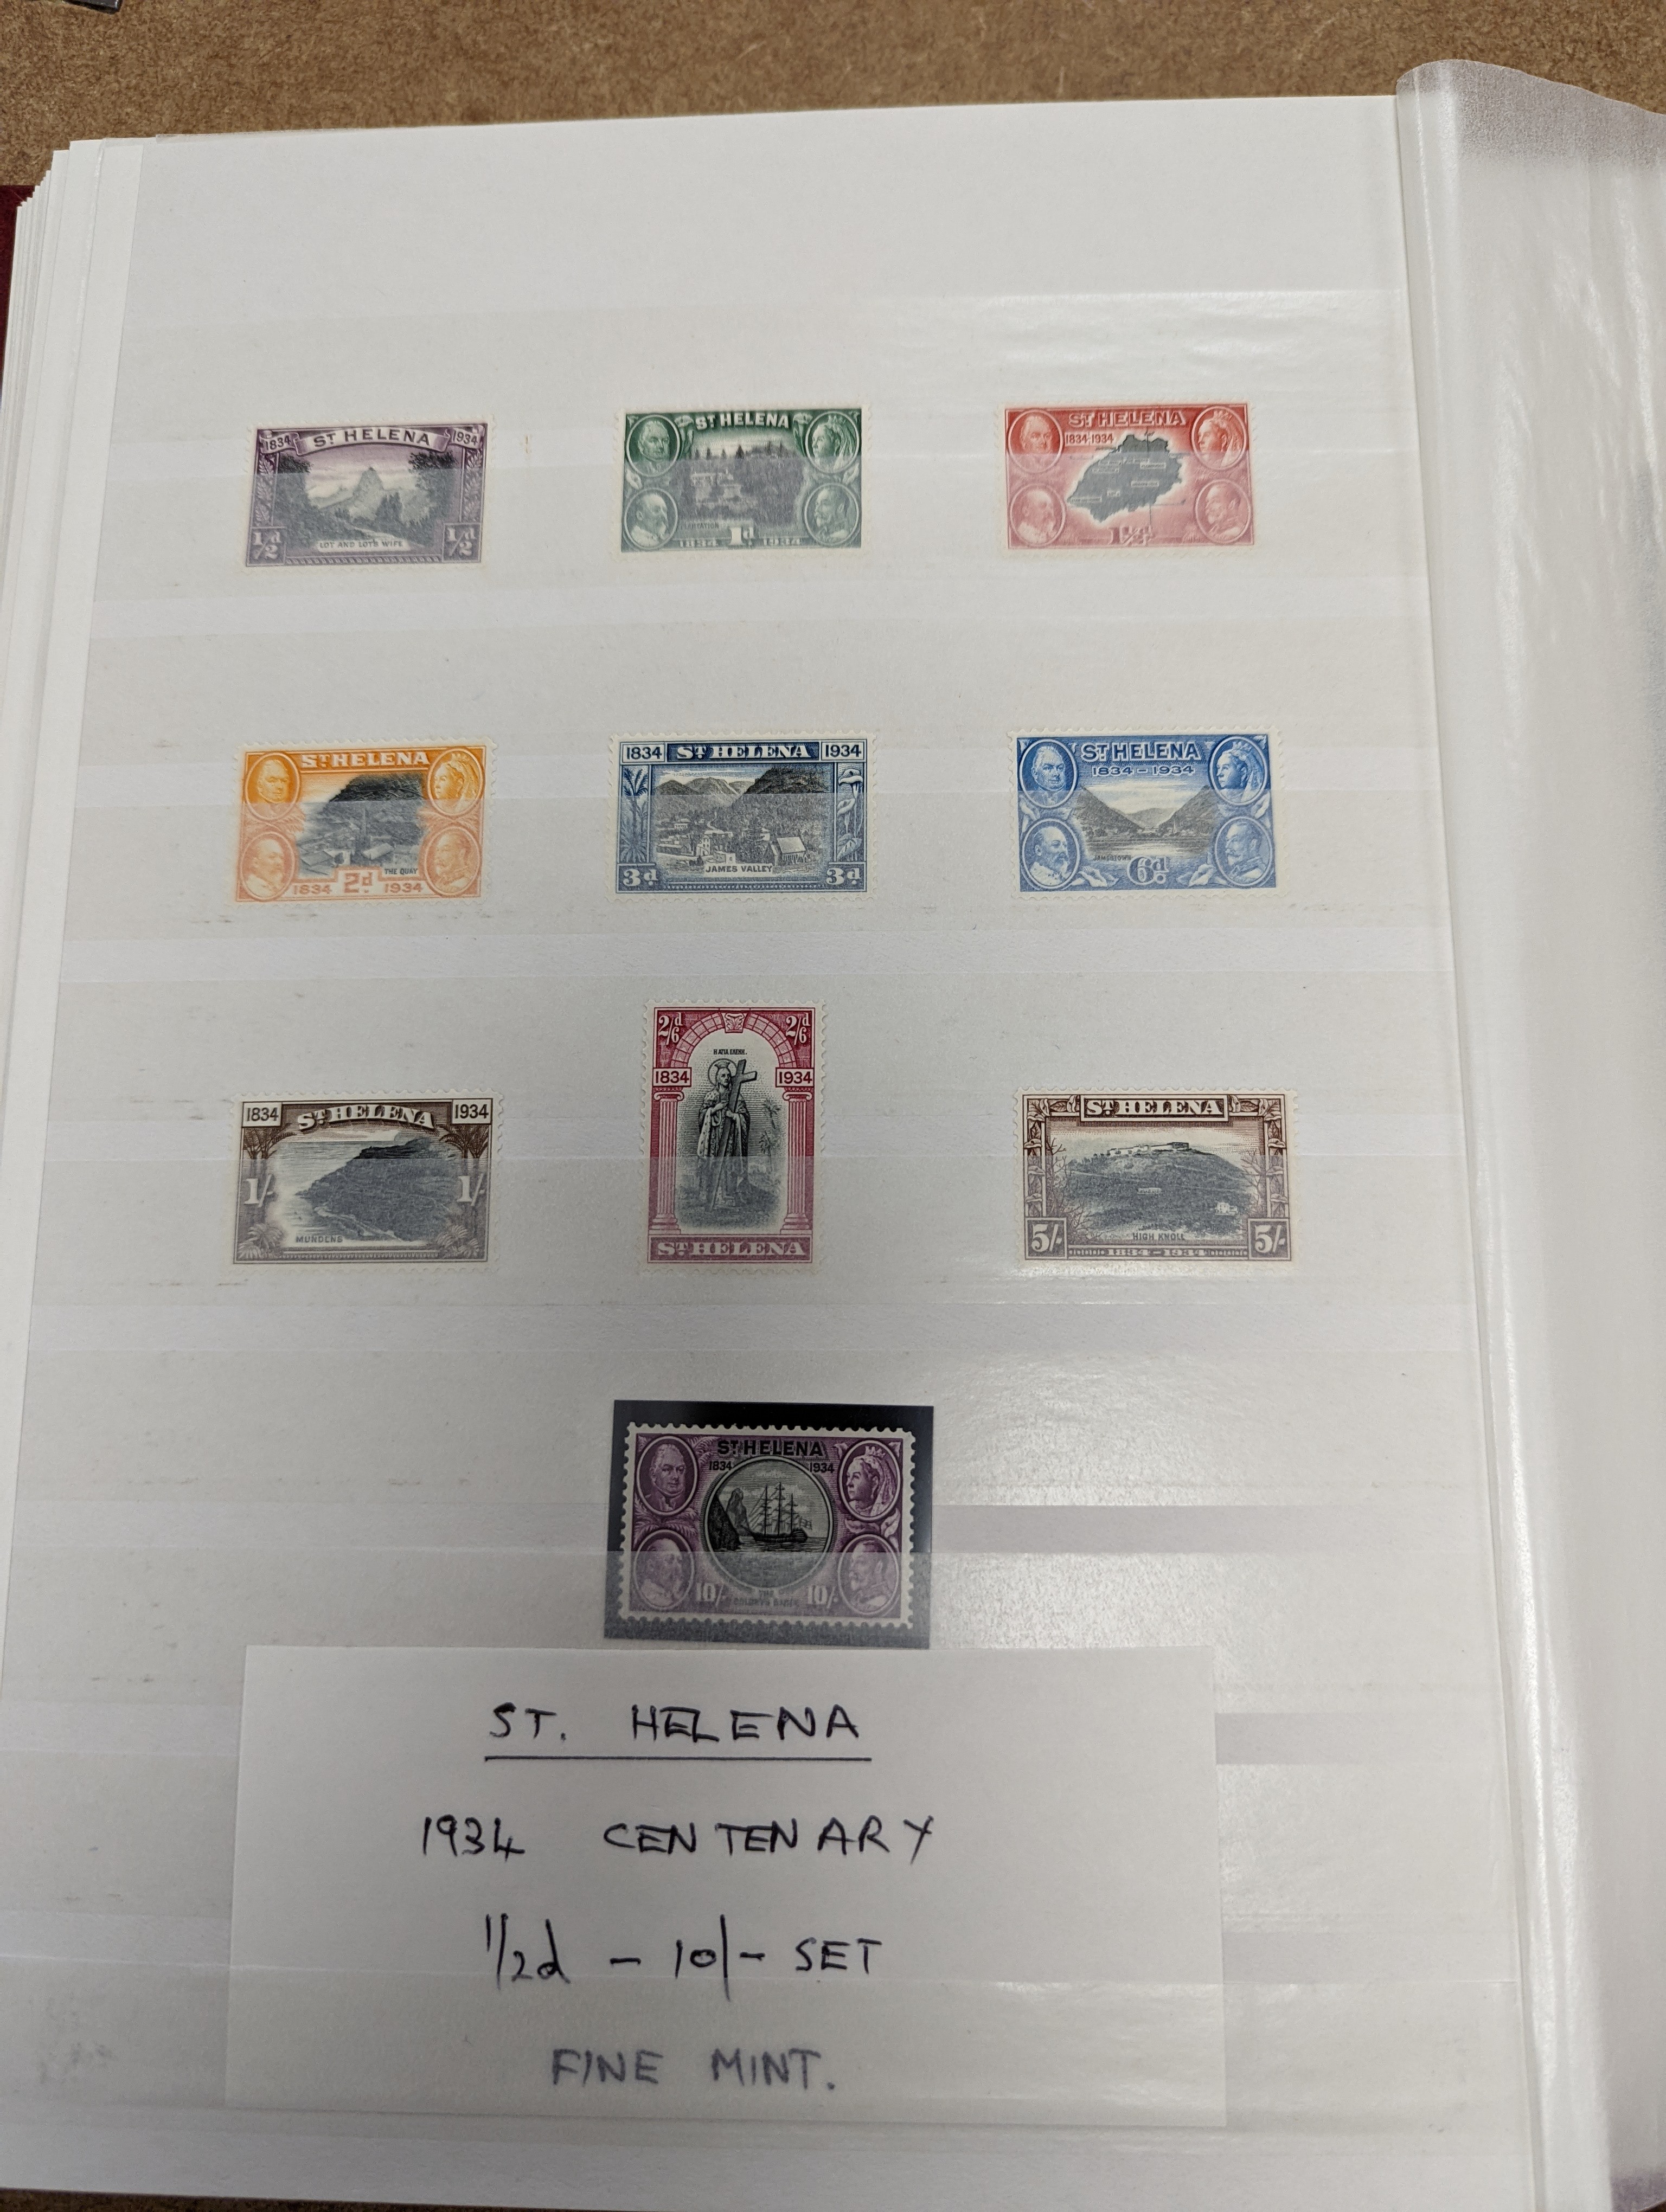 British Commonwealth stamps in stock book with Ascension 1922 set overprinted specimen, 1924 set mint, Bahamas, Barbados Britannia Heads, Cyprus 1928 anniversary set- £1 mint, Falkland 1s. 1878 1d claret mint (and certif